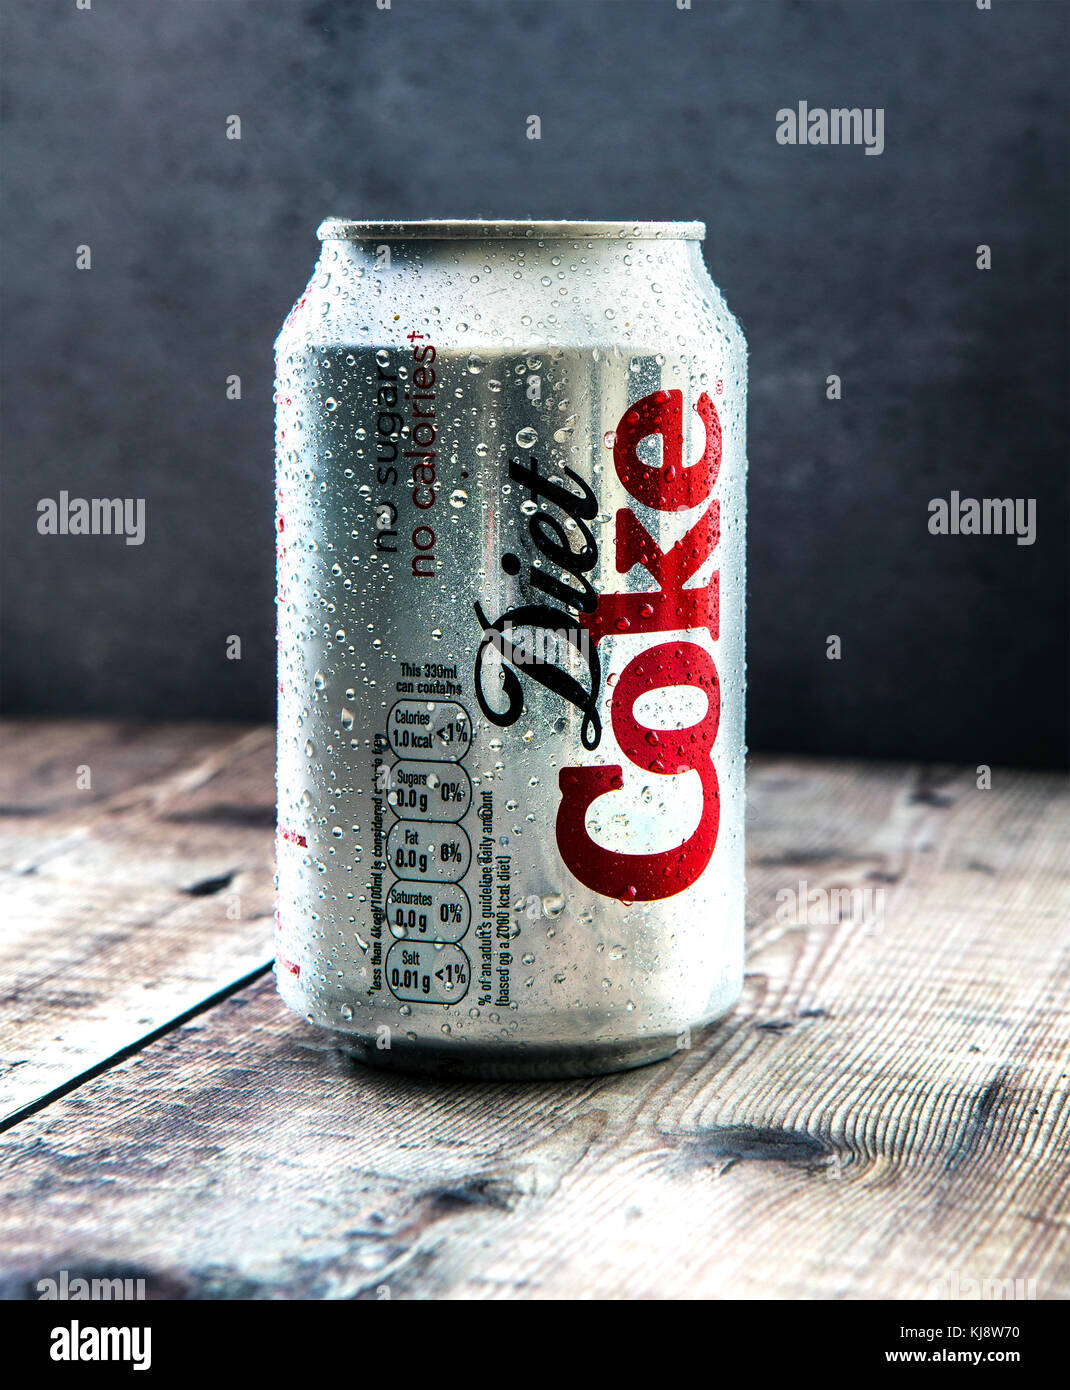 SWINDON, UK - NOVEMBER 21 2017: Can of Diet COKE (Coca-Cola) on a rustic background Stock Photo